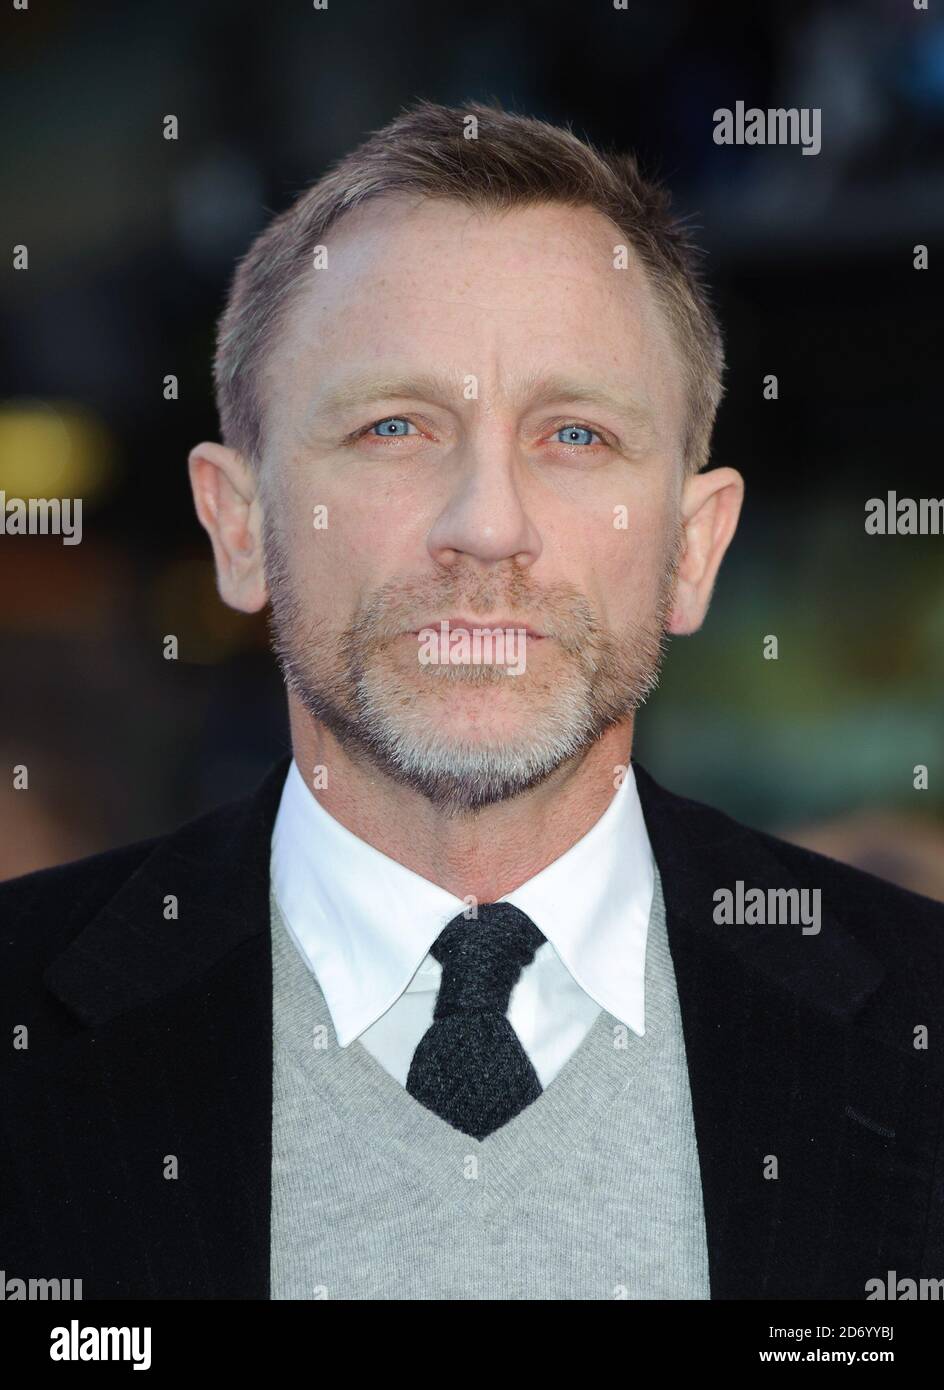 Daniel Craig attending the premiere of Tintin, at the Odeon cinema in ...